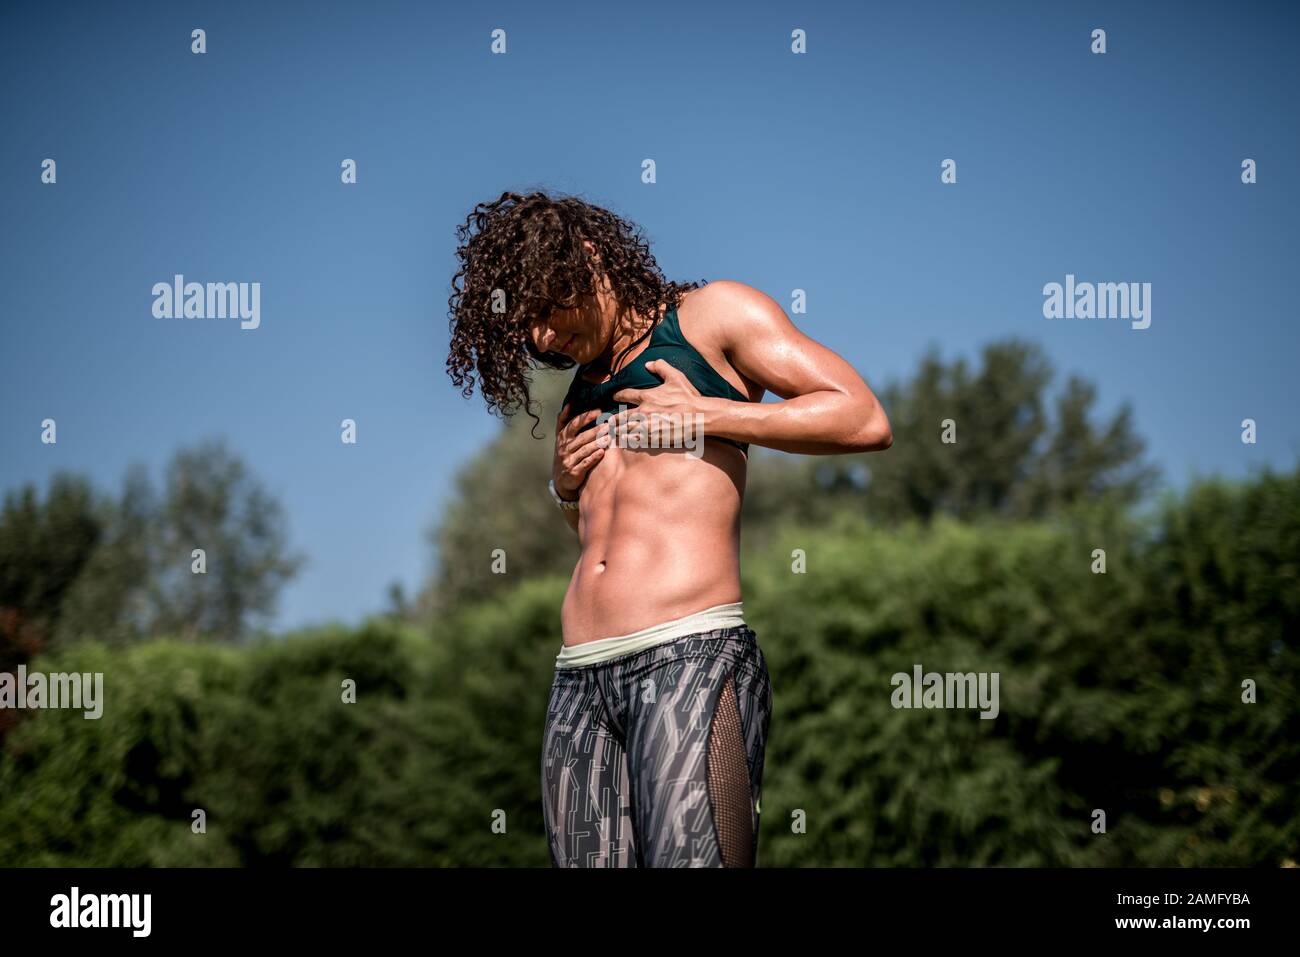 Athletic woman with strong abdominal muscles posing with her hands